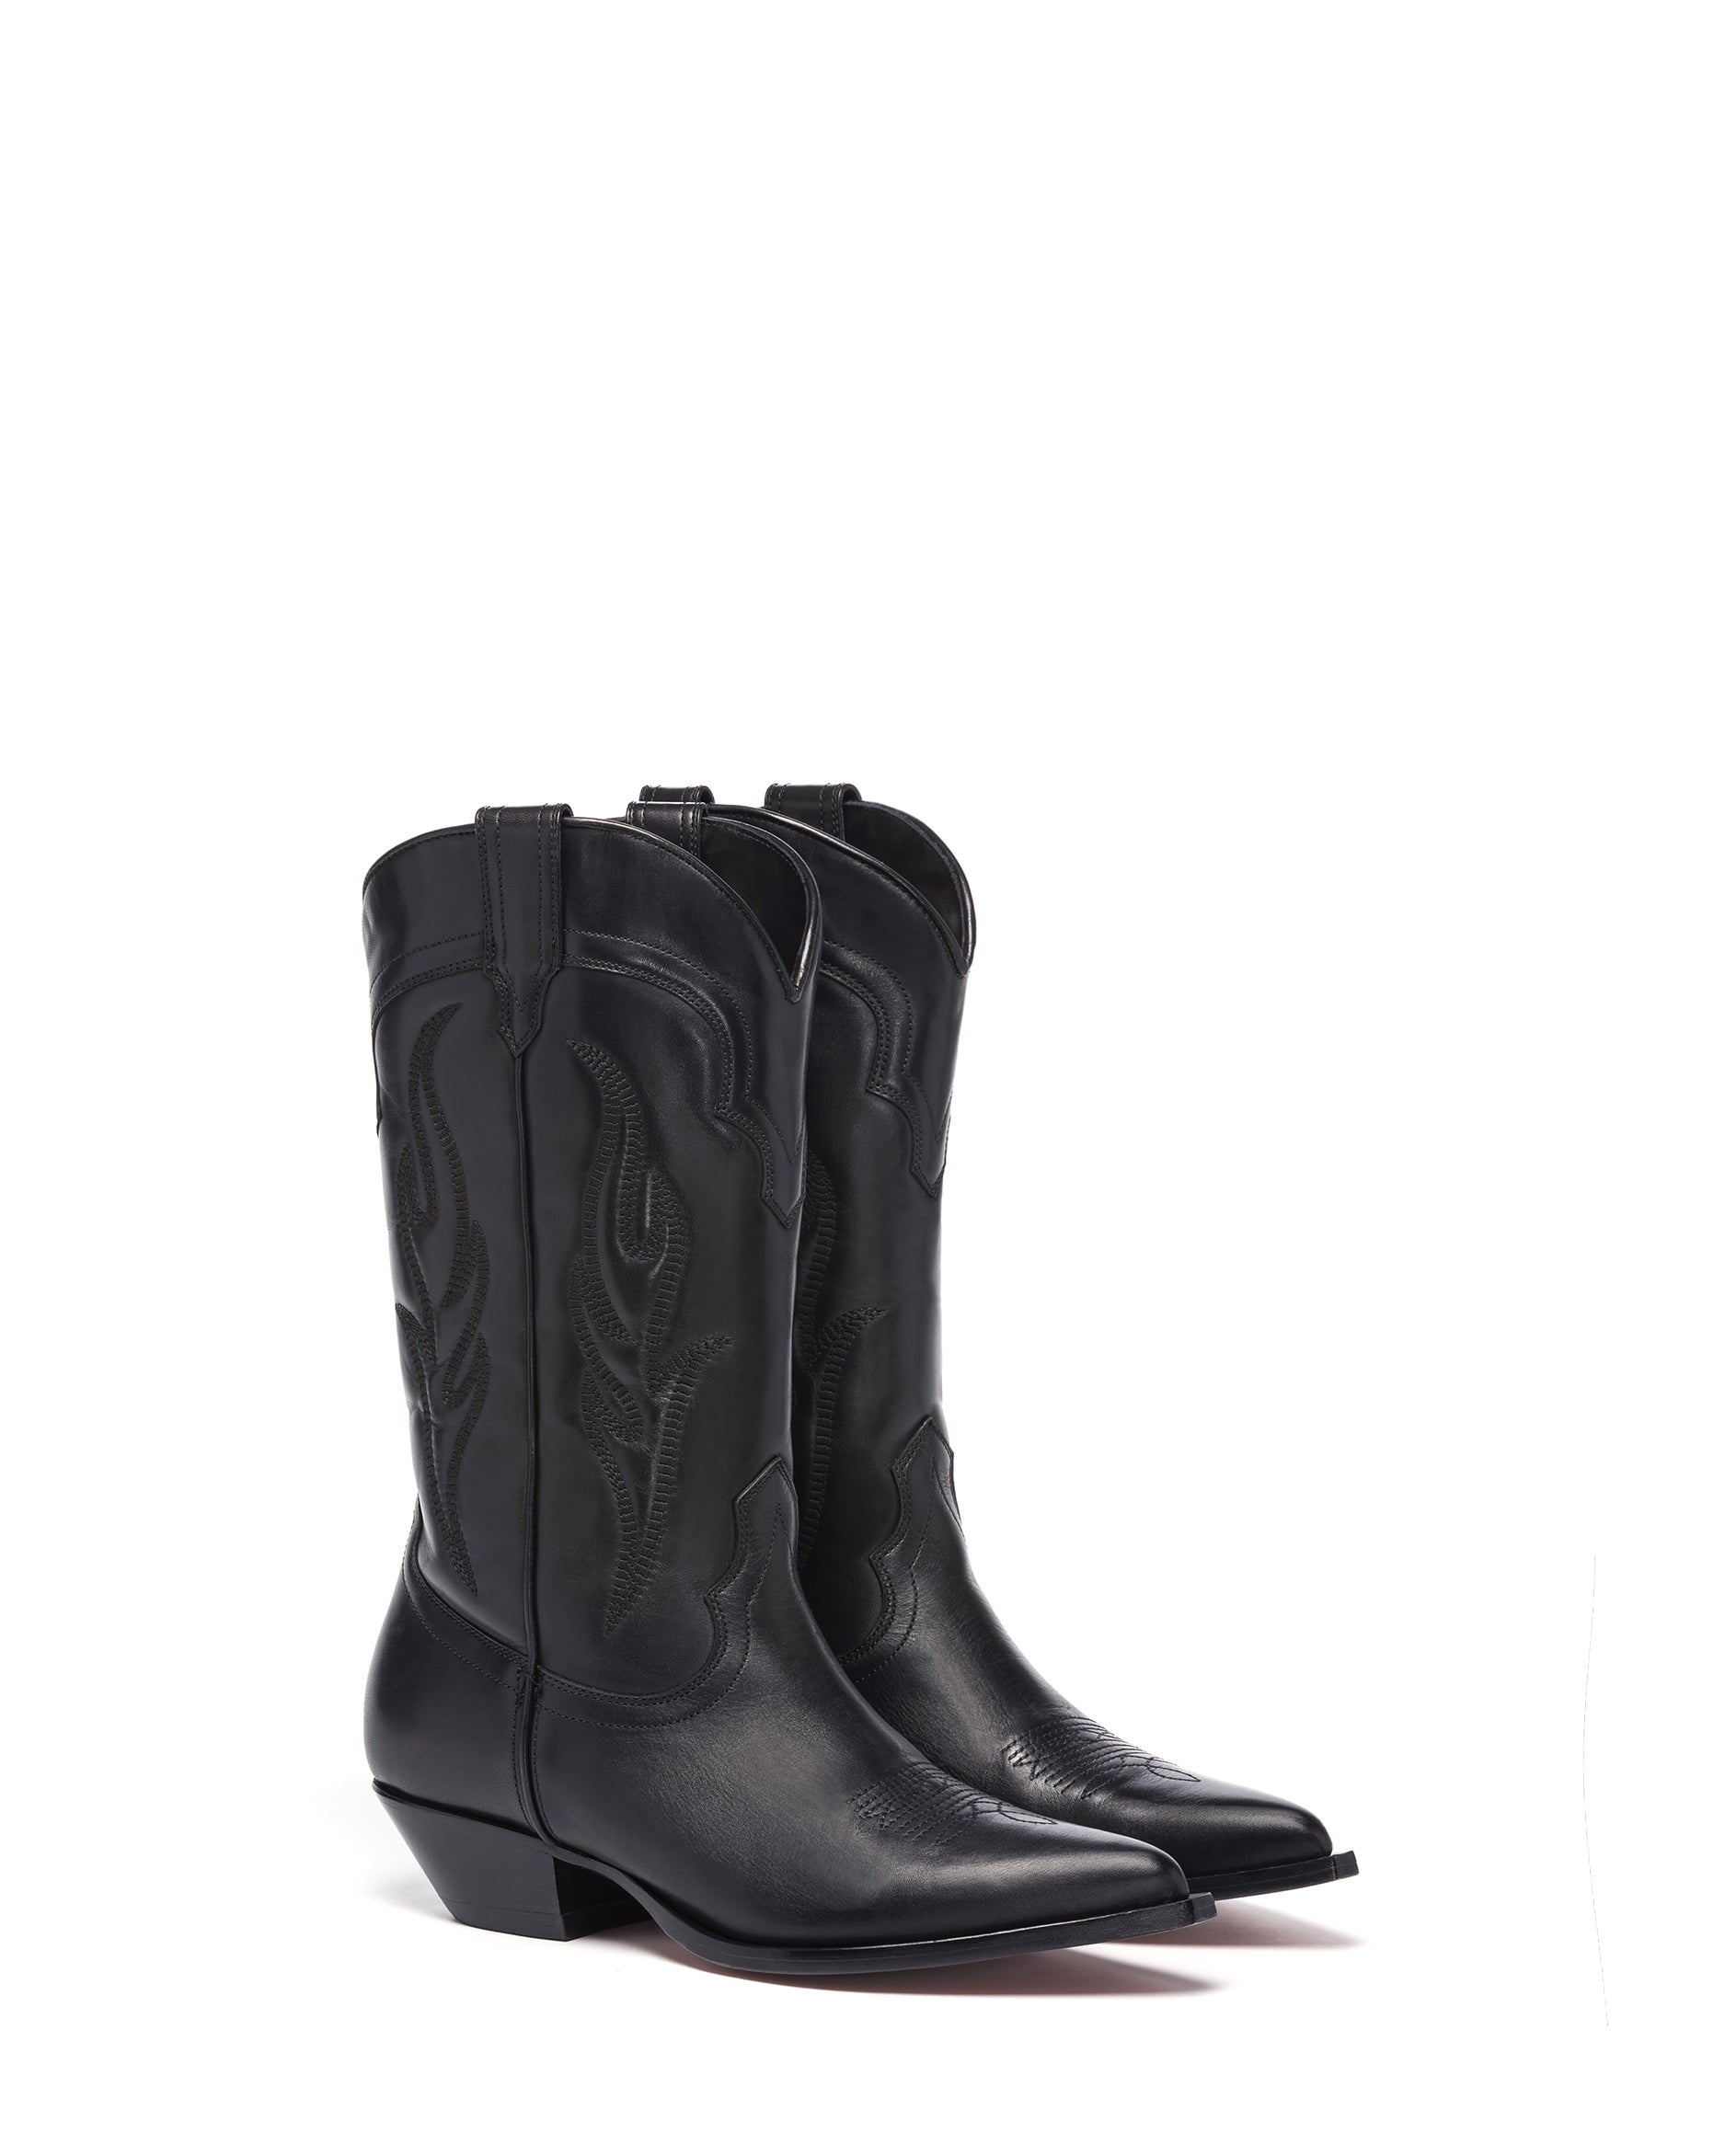 Santafe Men's Cowboy Boots in Black Calfskin | On Tone Embroidery 02